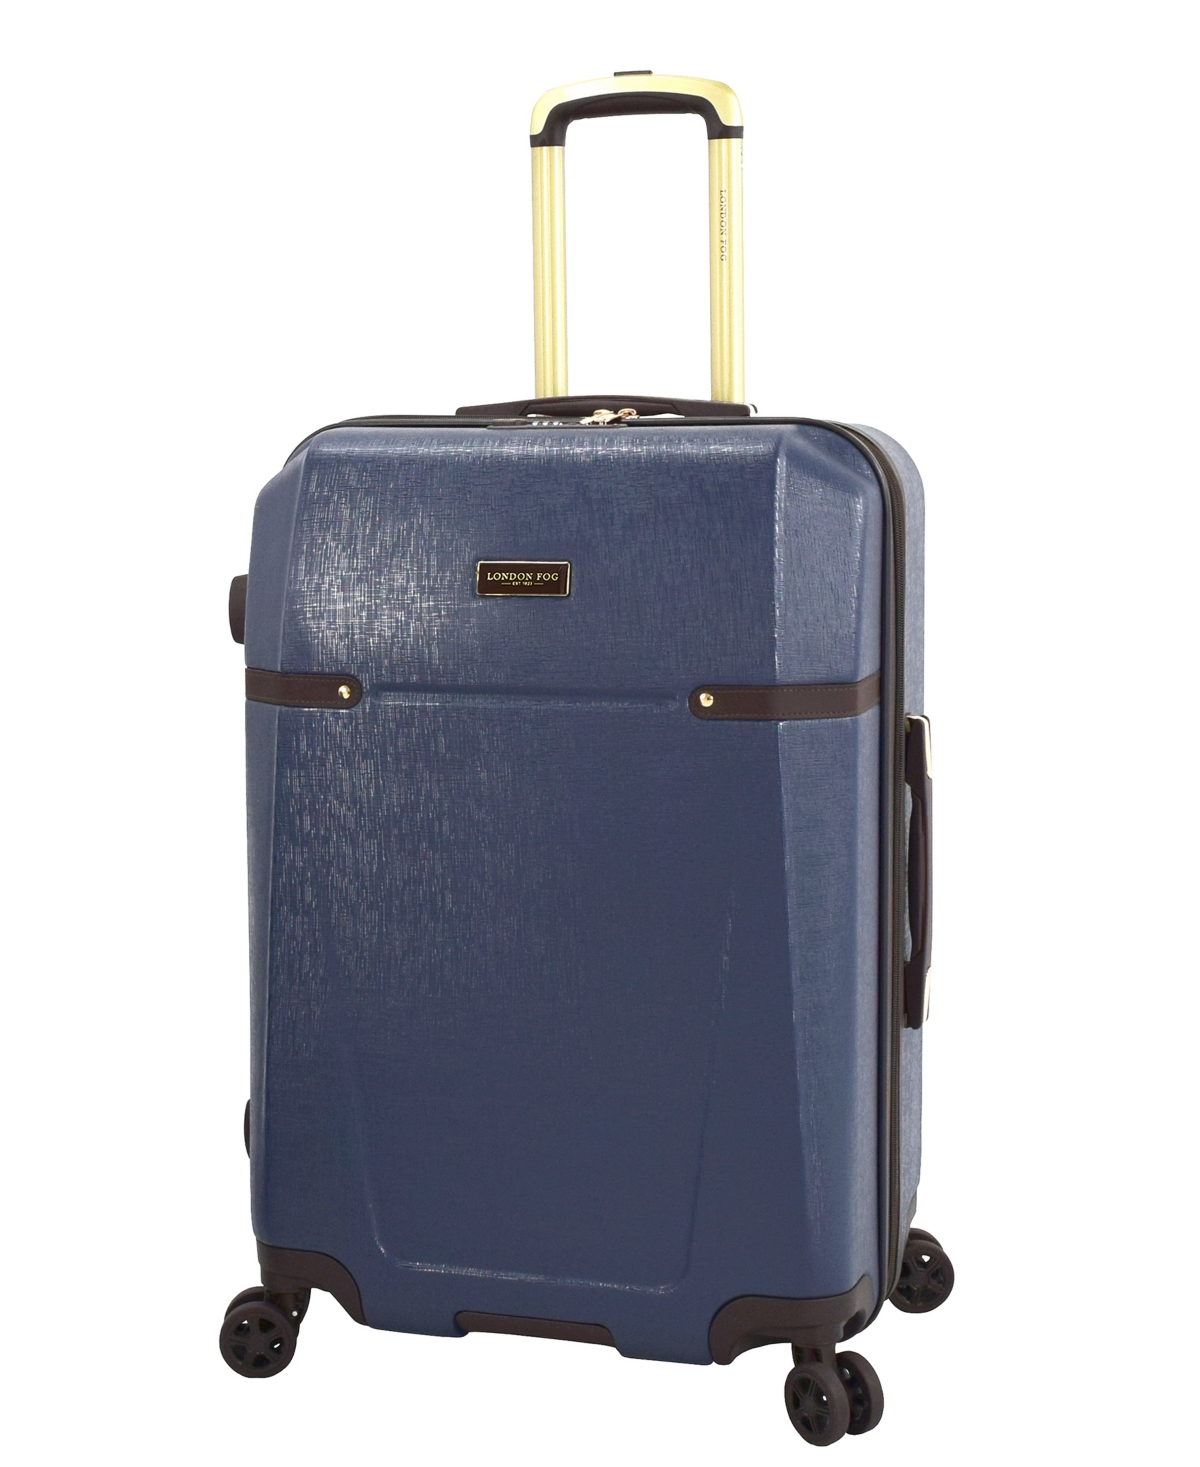 Closeout! London Fog Brentwood Ii 25" Expandable Hardside Spinner Luggage - Classic Blue